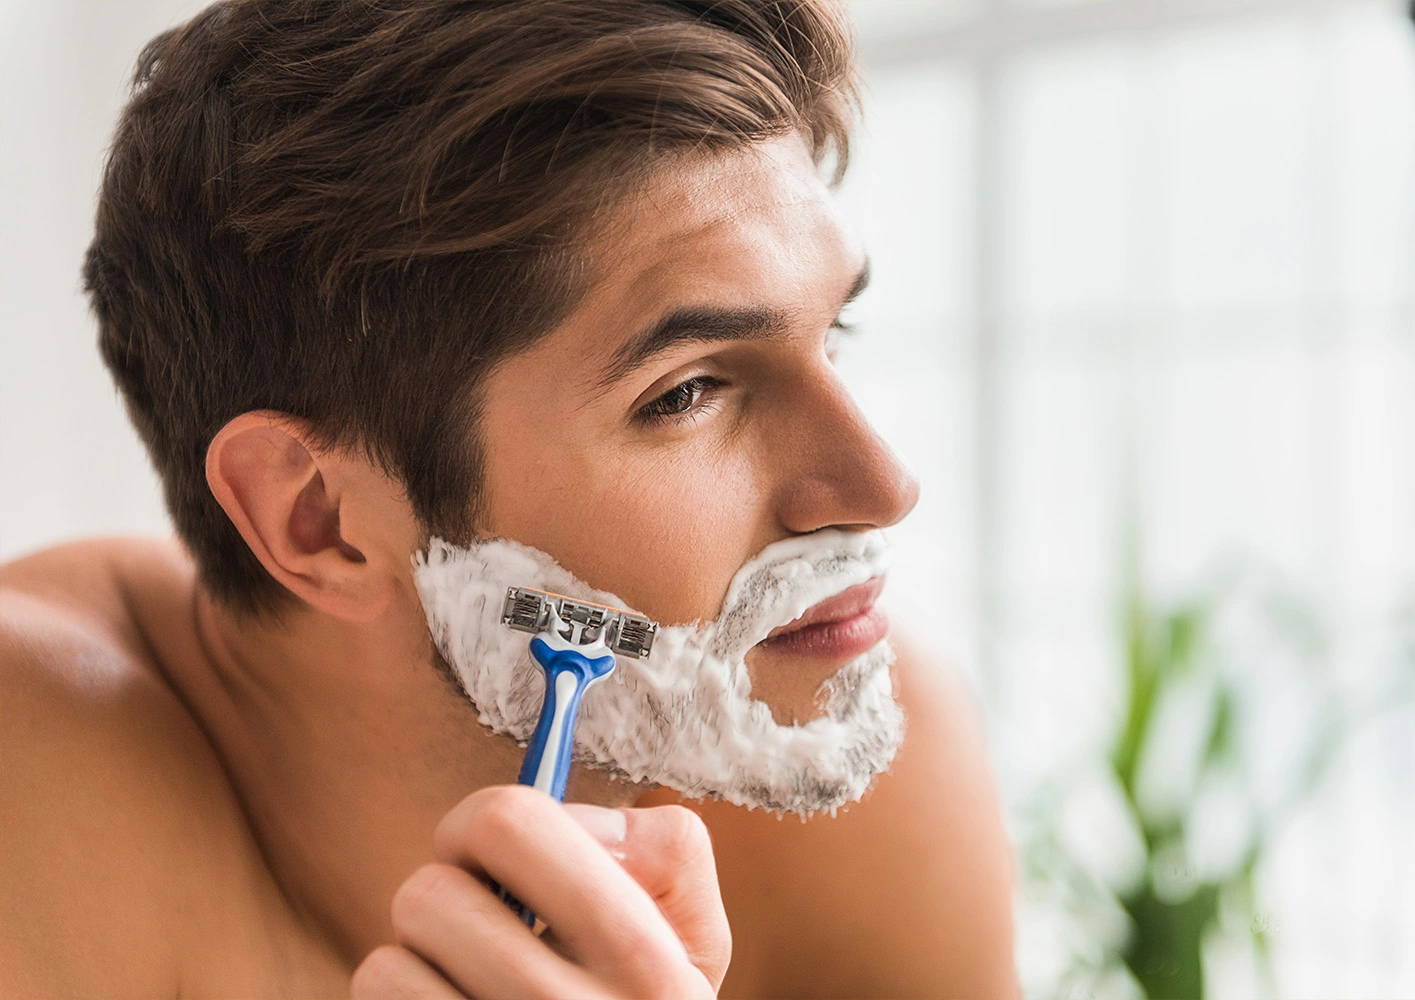 Save time and look great with the ultimate men’s grooming routine